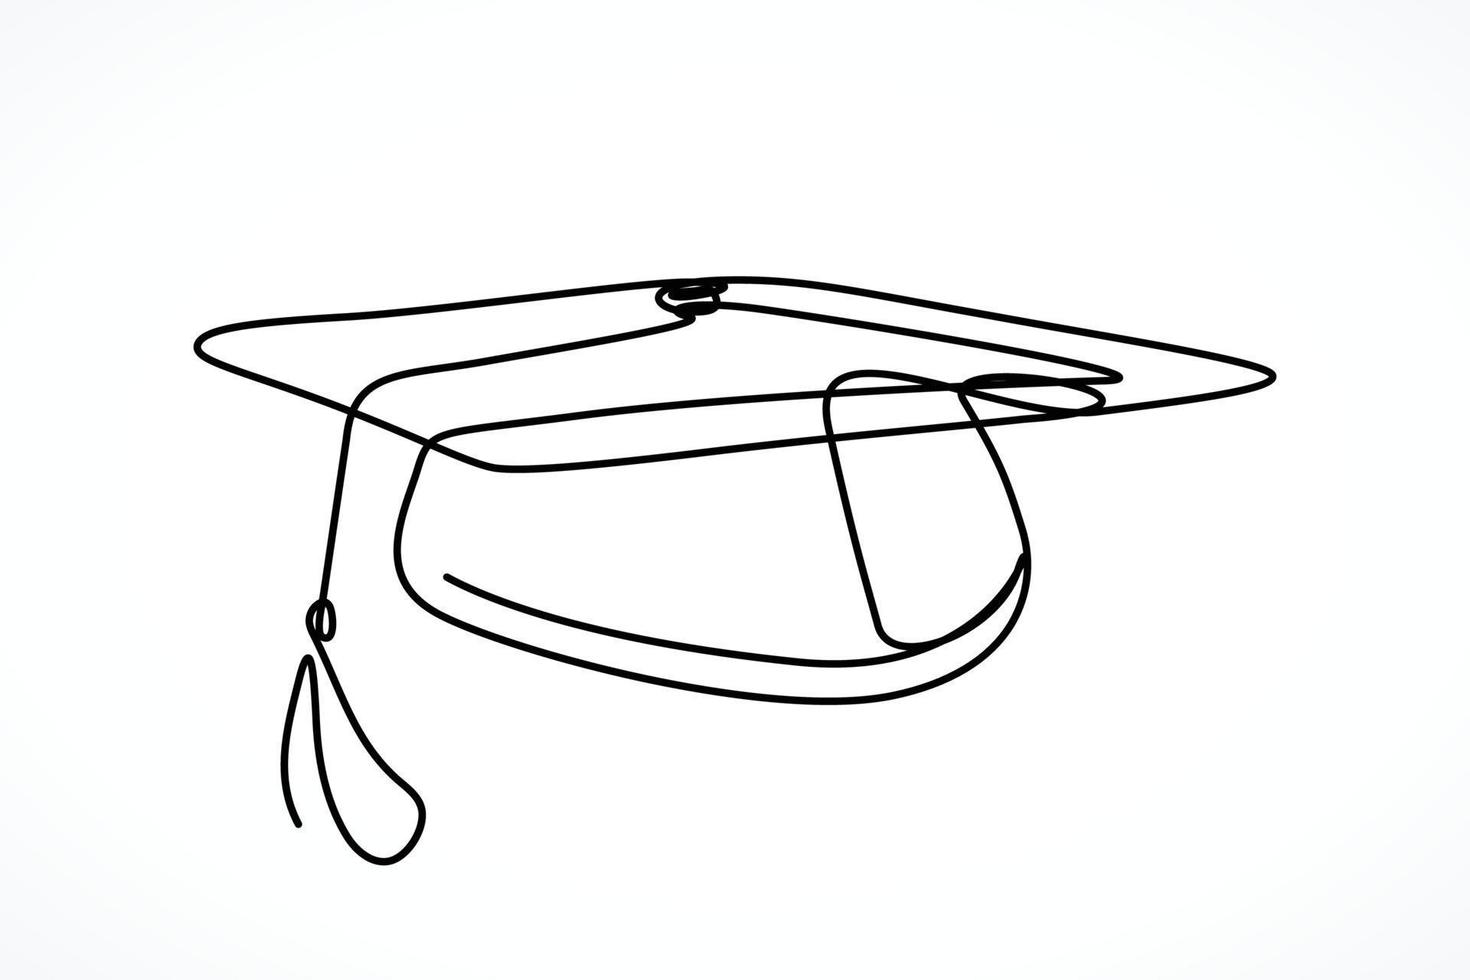 Single continuous line drawing of graduation hat vector